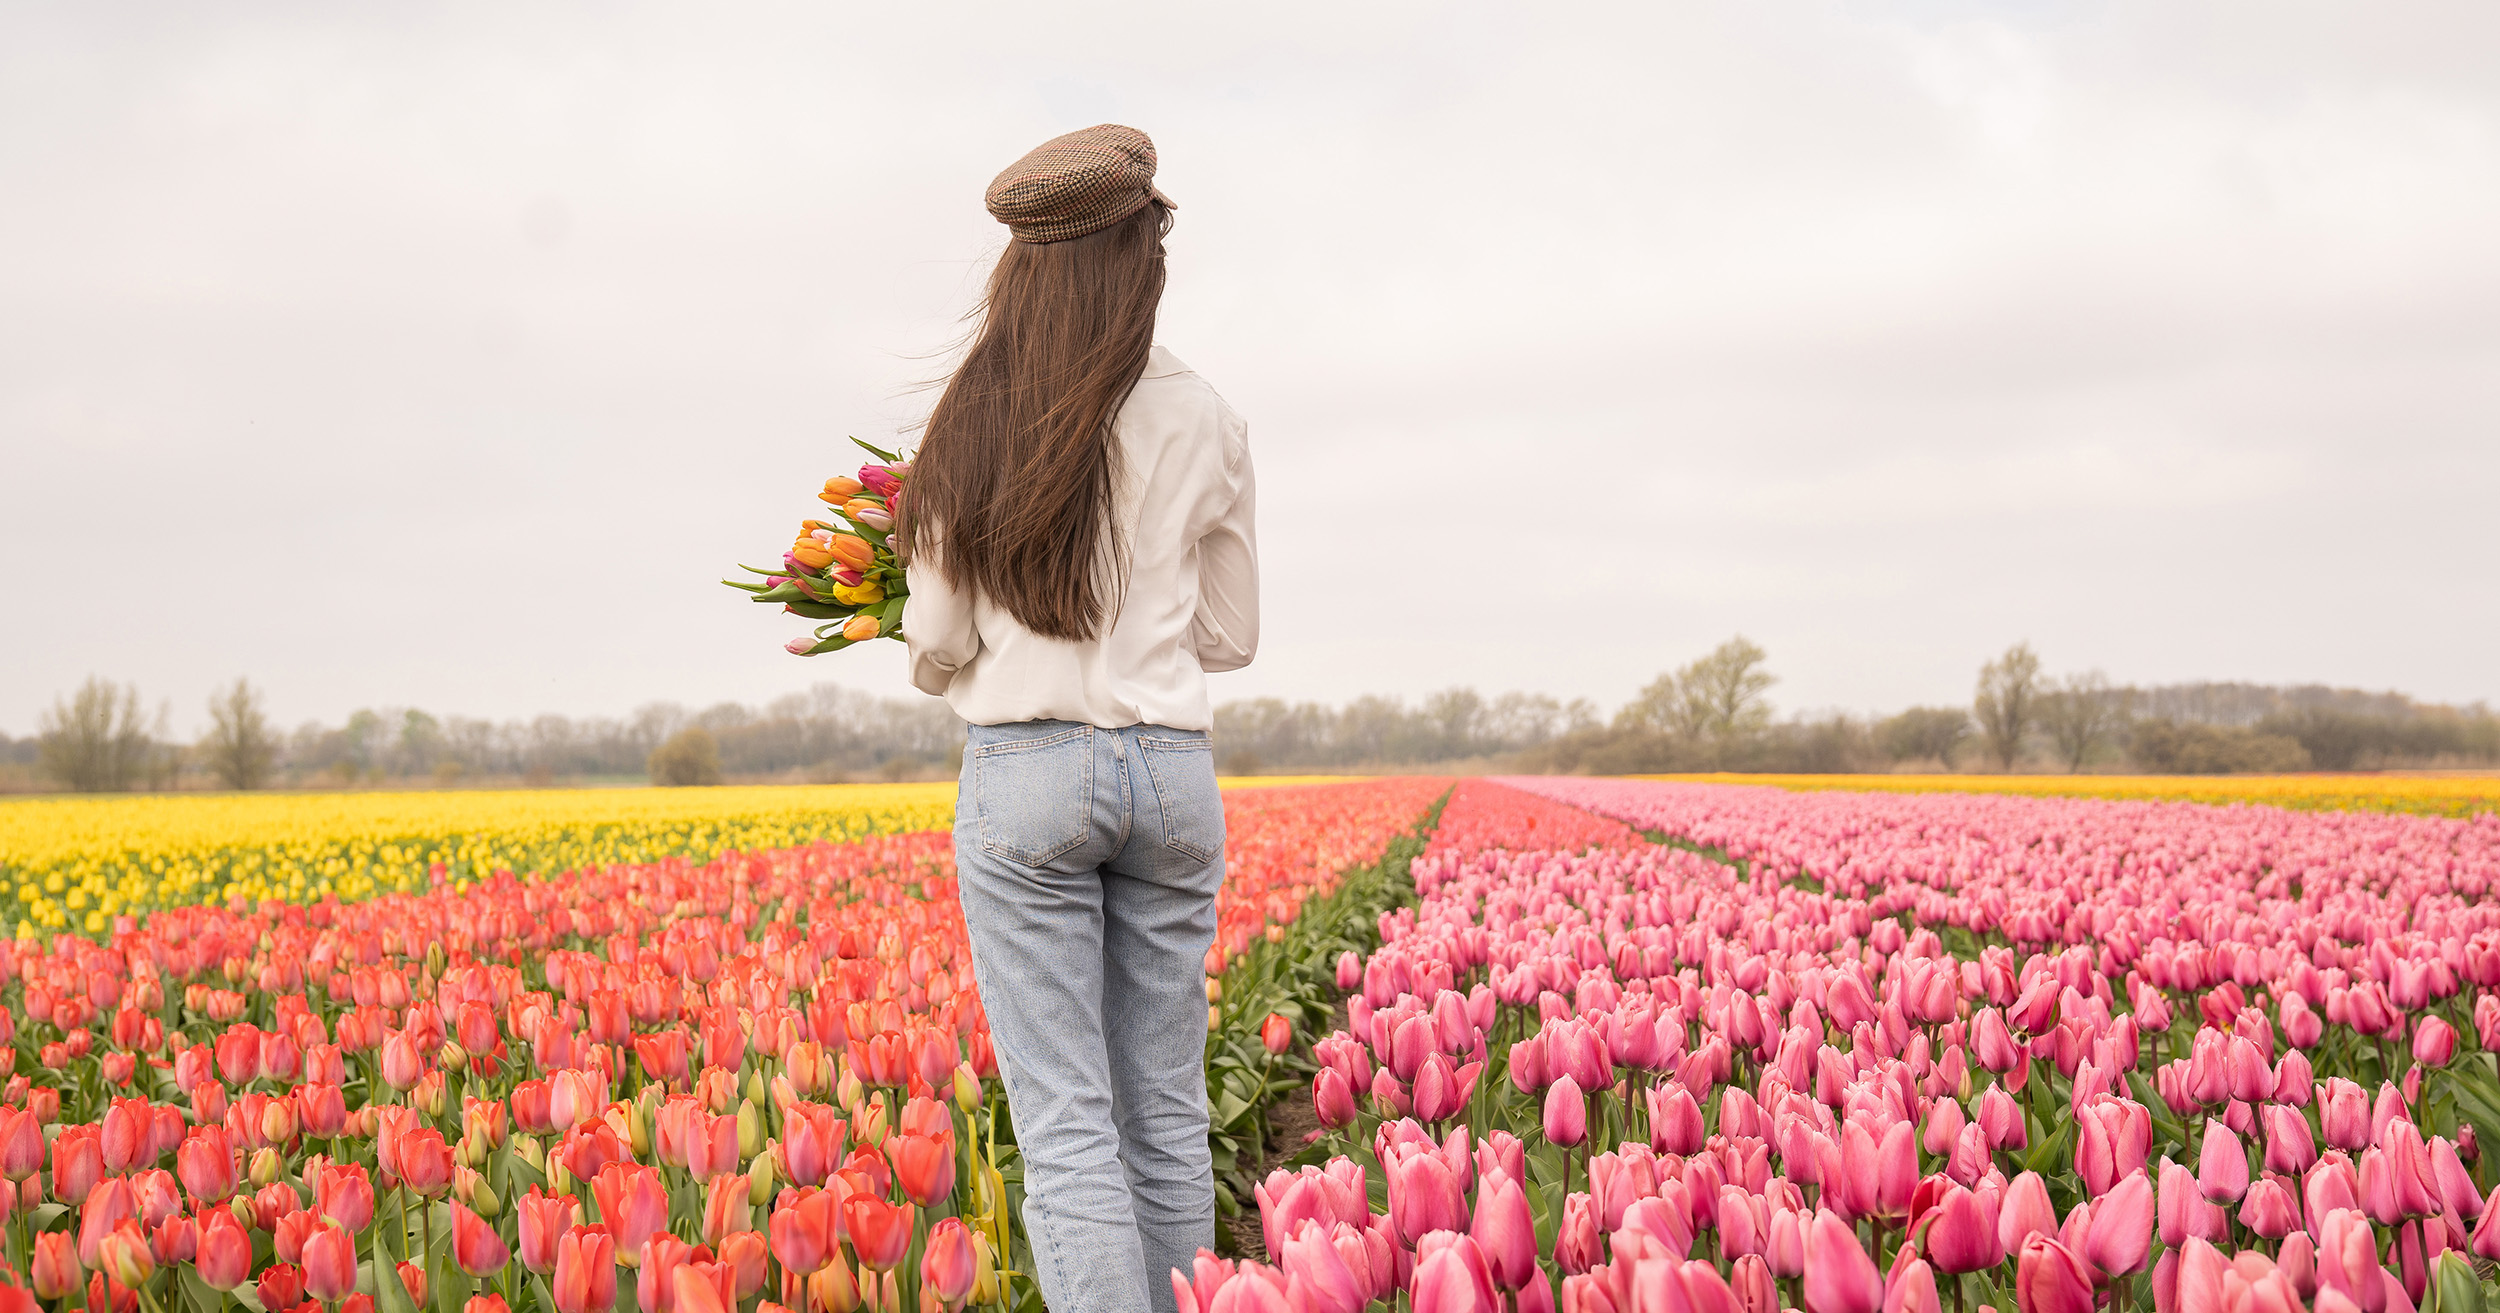 Tulip garden photo idea of a woman with a tulip bouquet surrounded by colorful tulip fields.